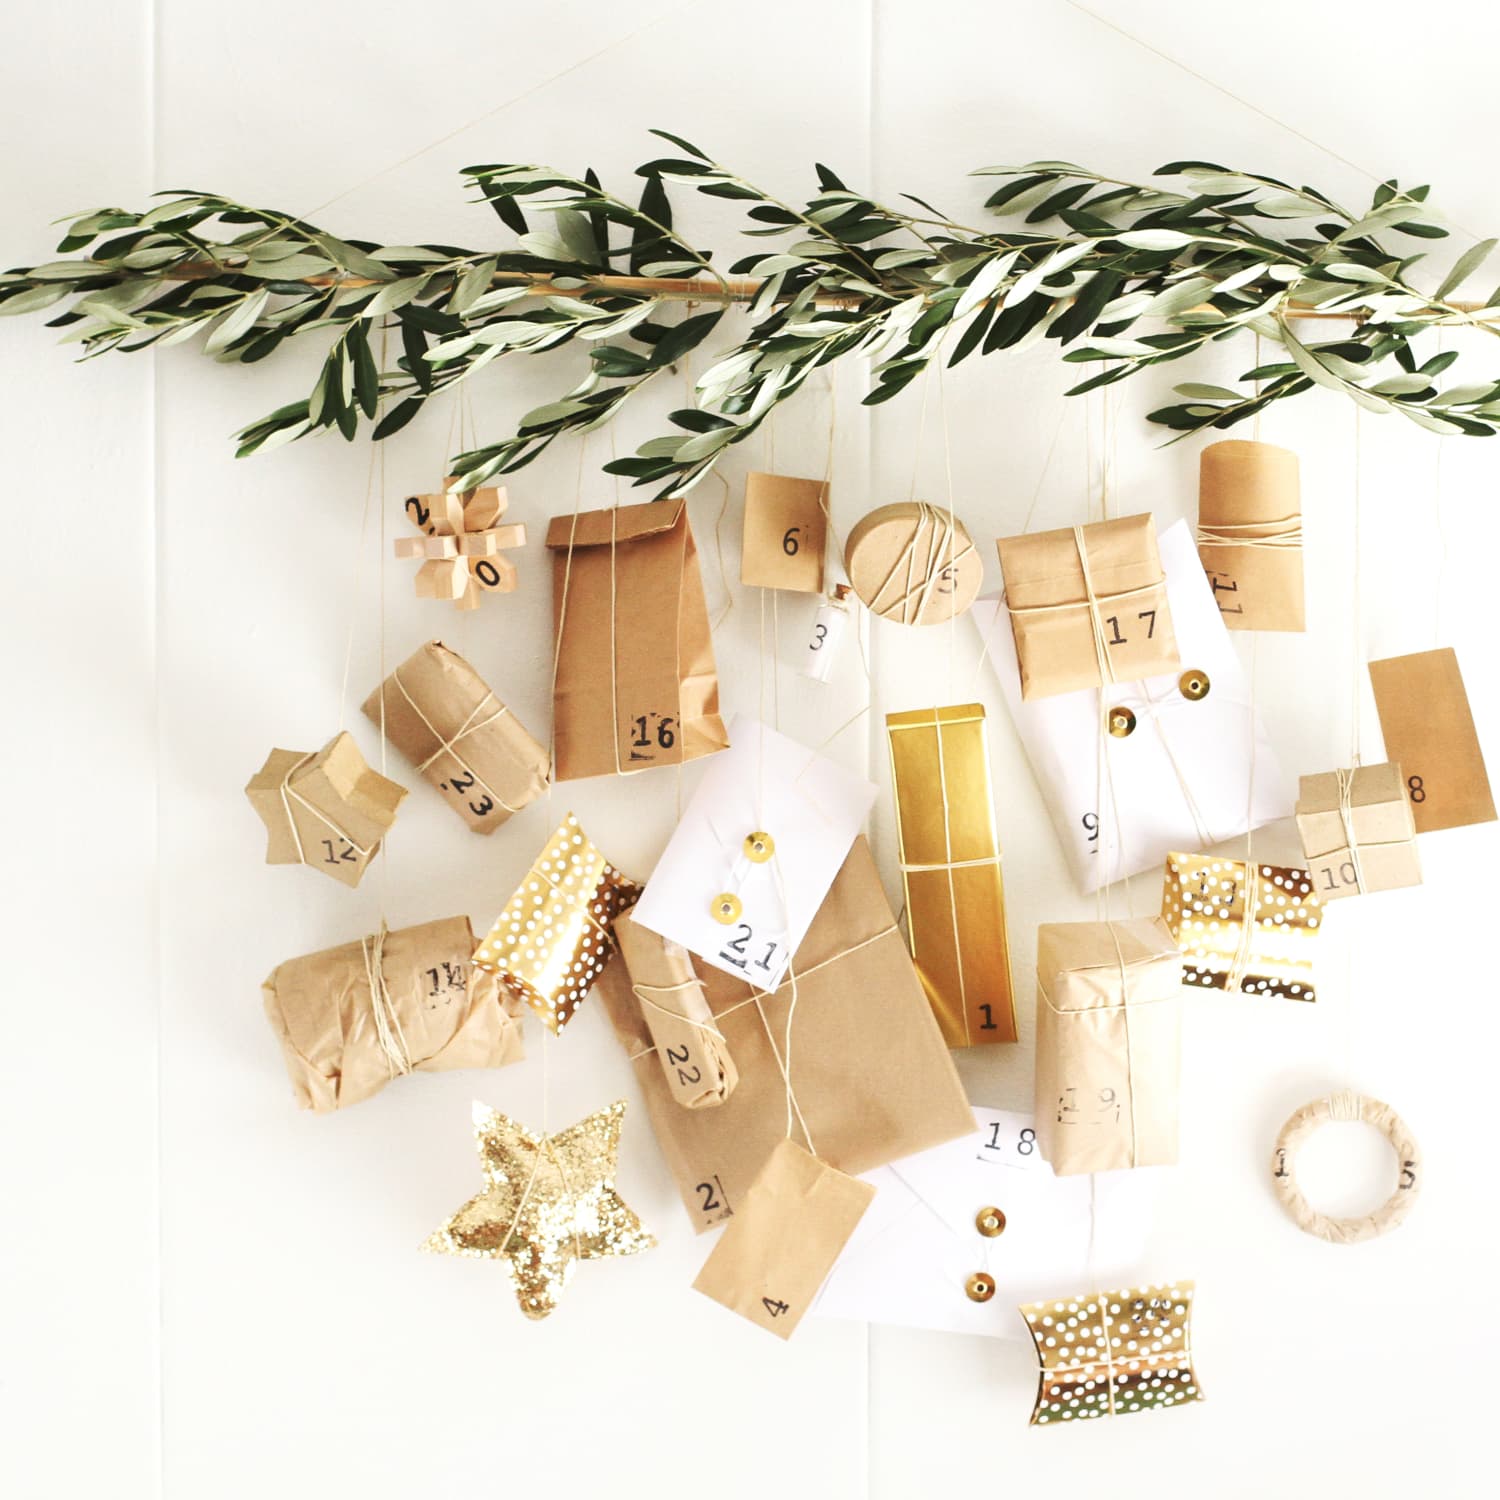 Advent Beige Wrapping Paper